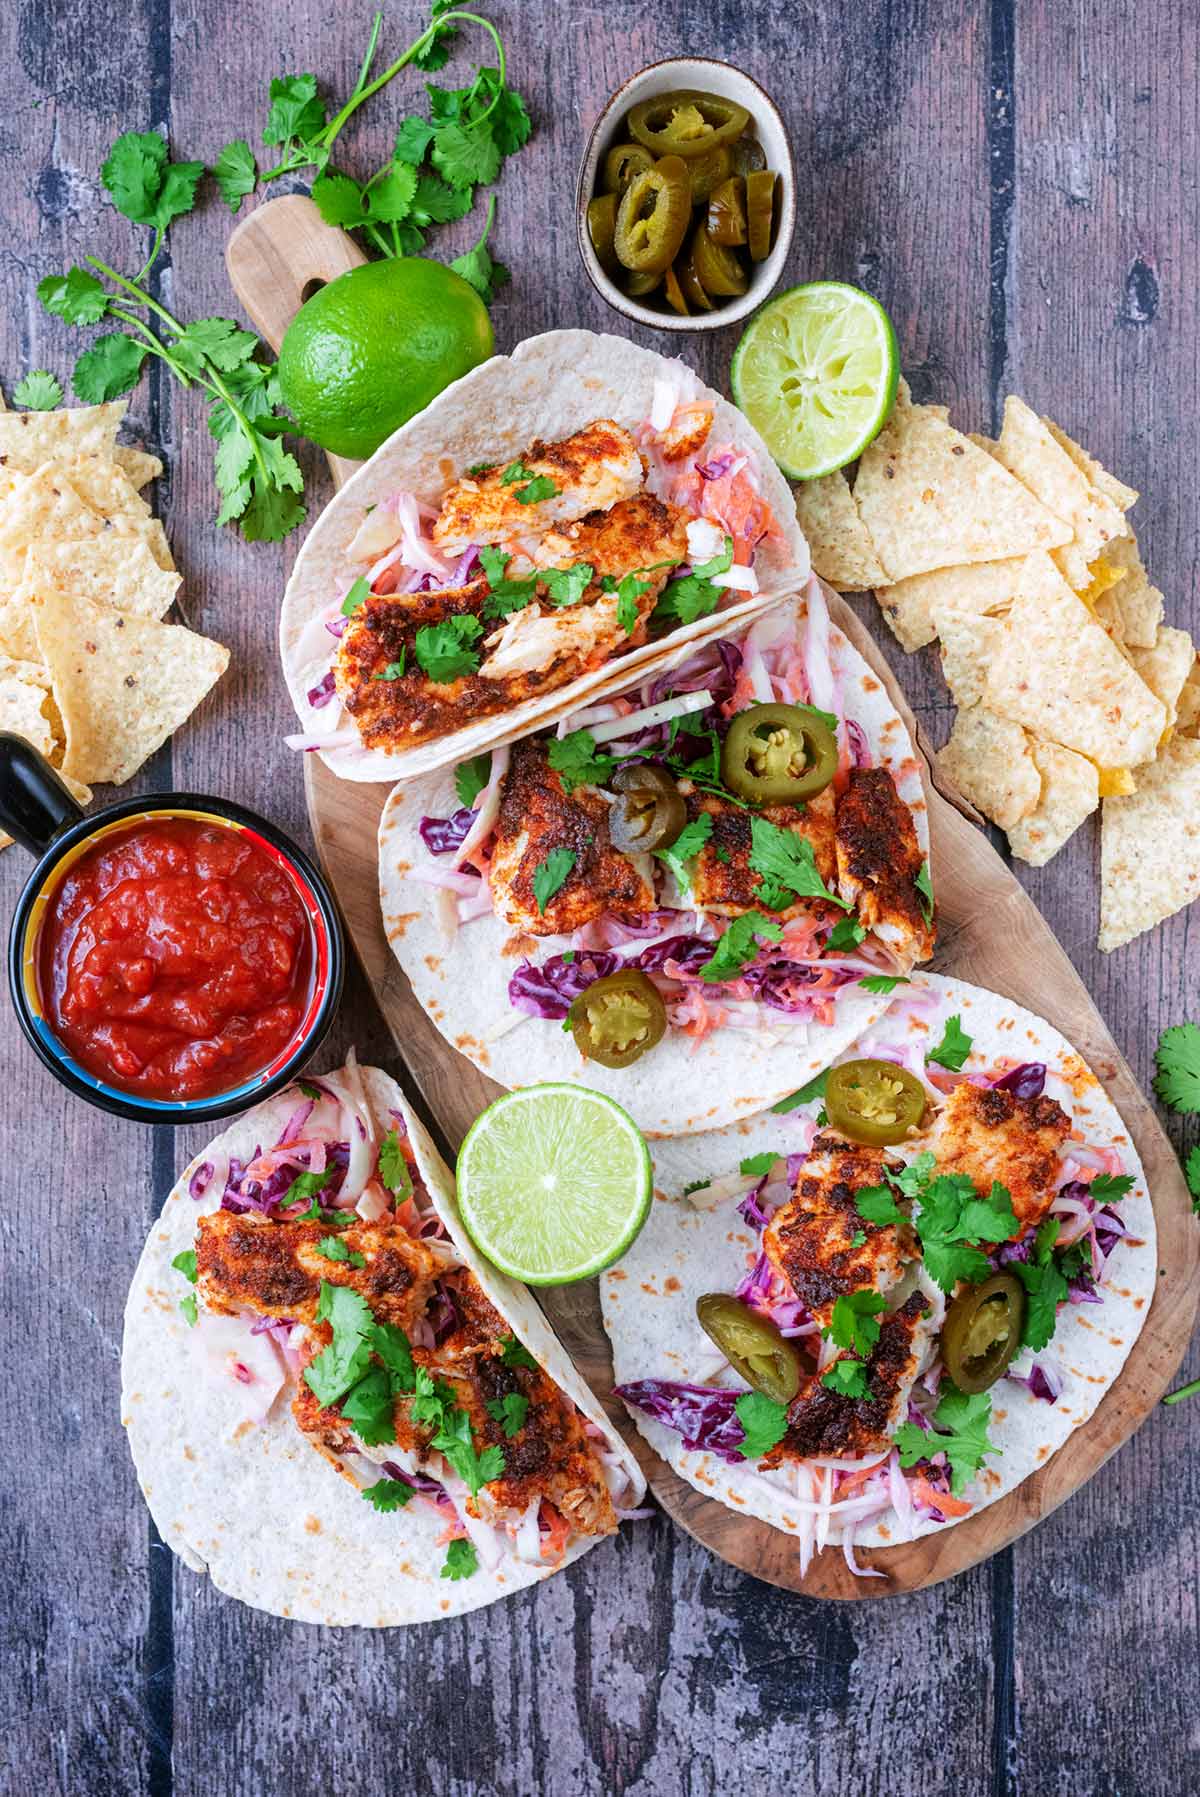 Four fish tacos on a wooden serving board next to salsa, tortilla chips and coriander.